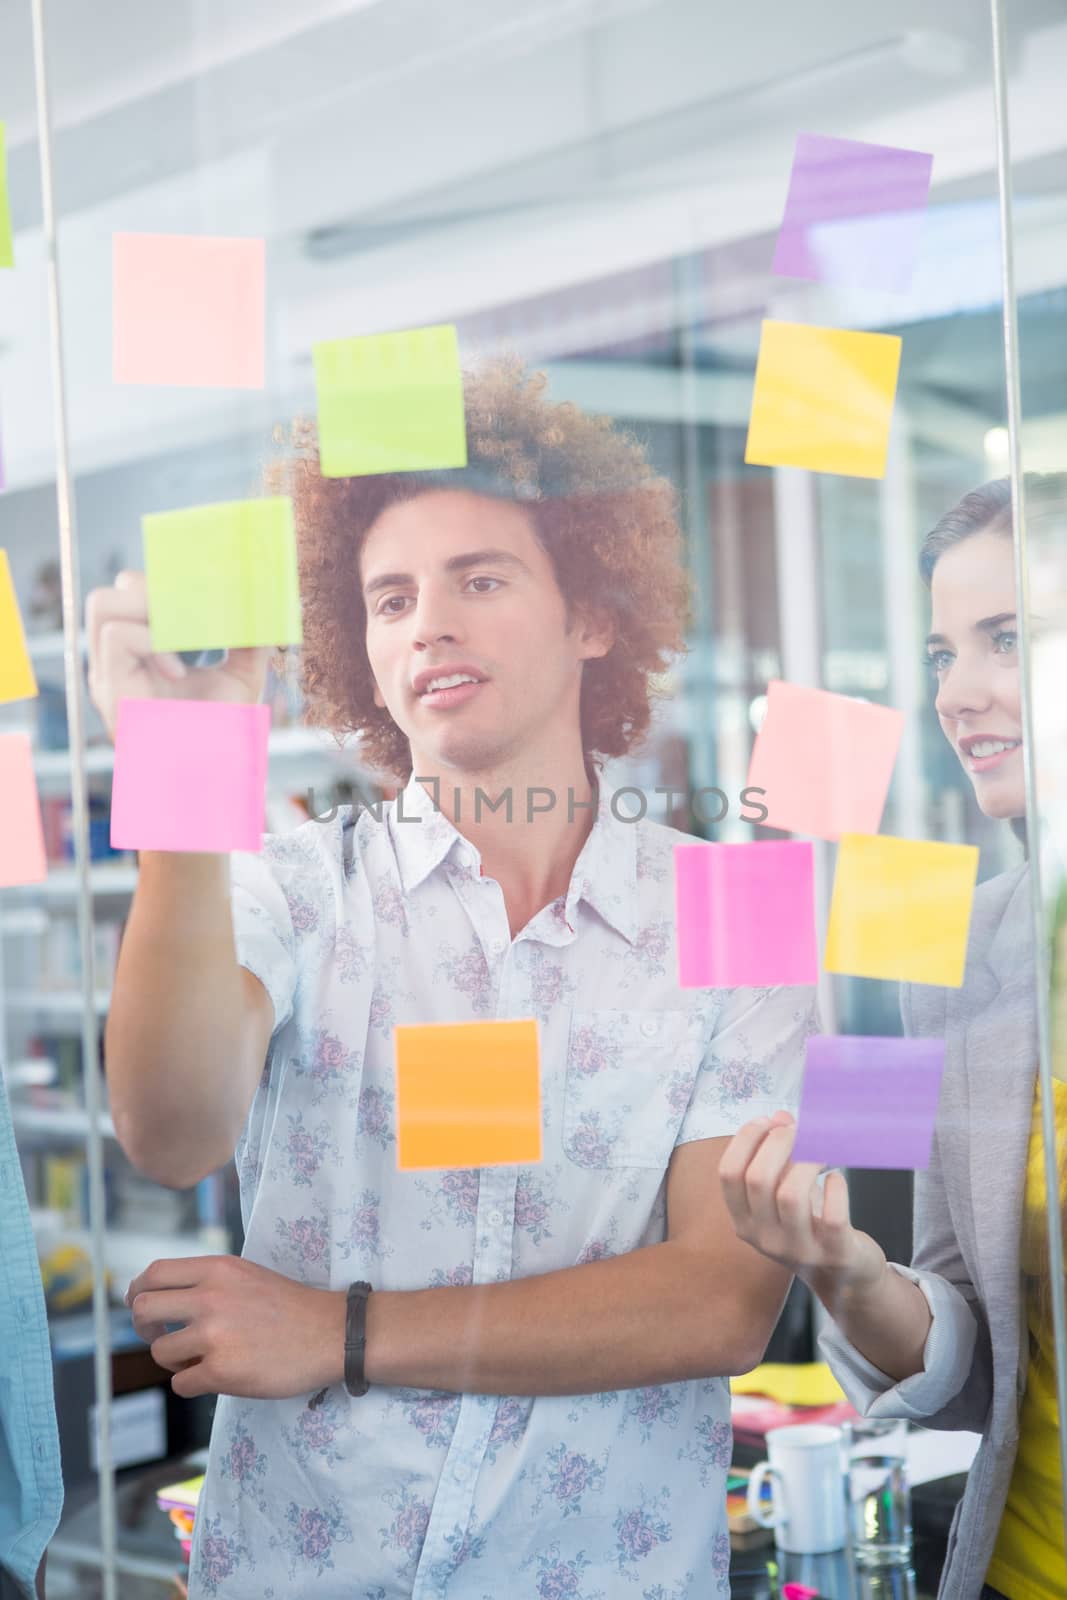 Creative team writing on adhesive notes by Wavebreakmedia